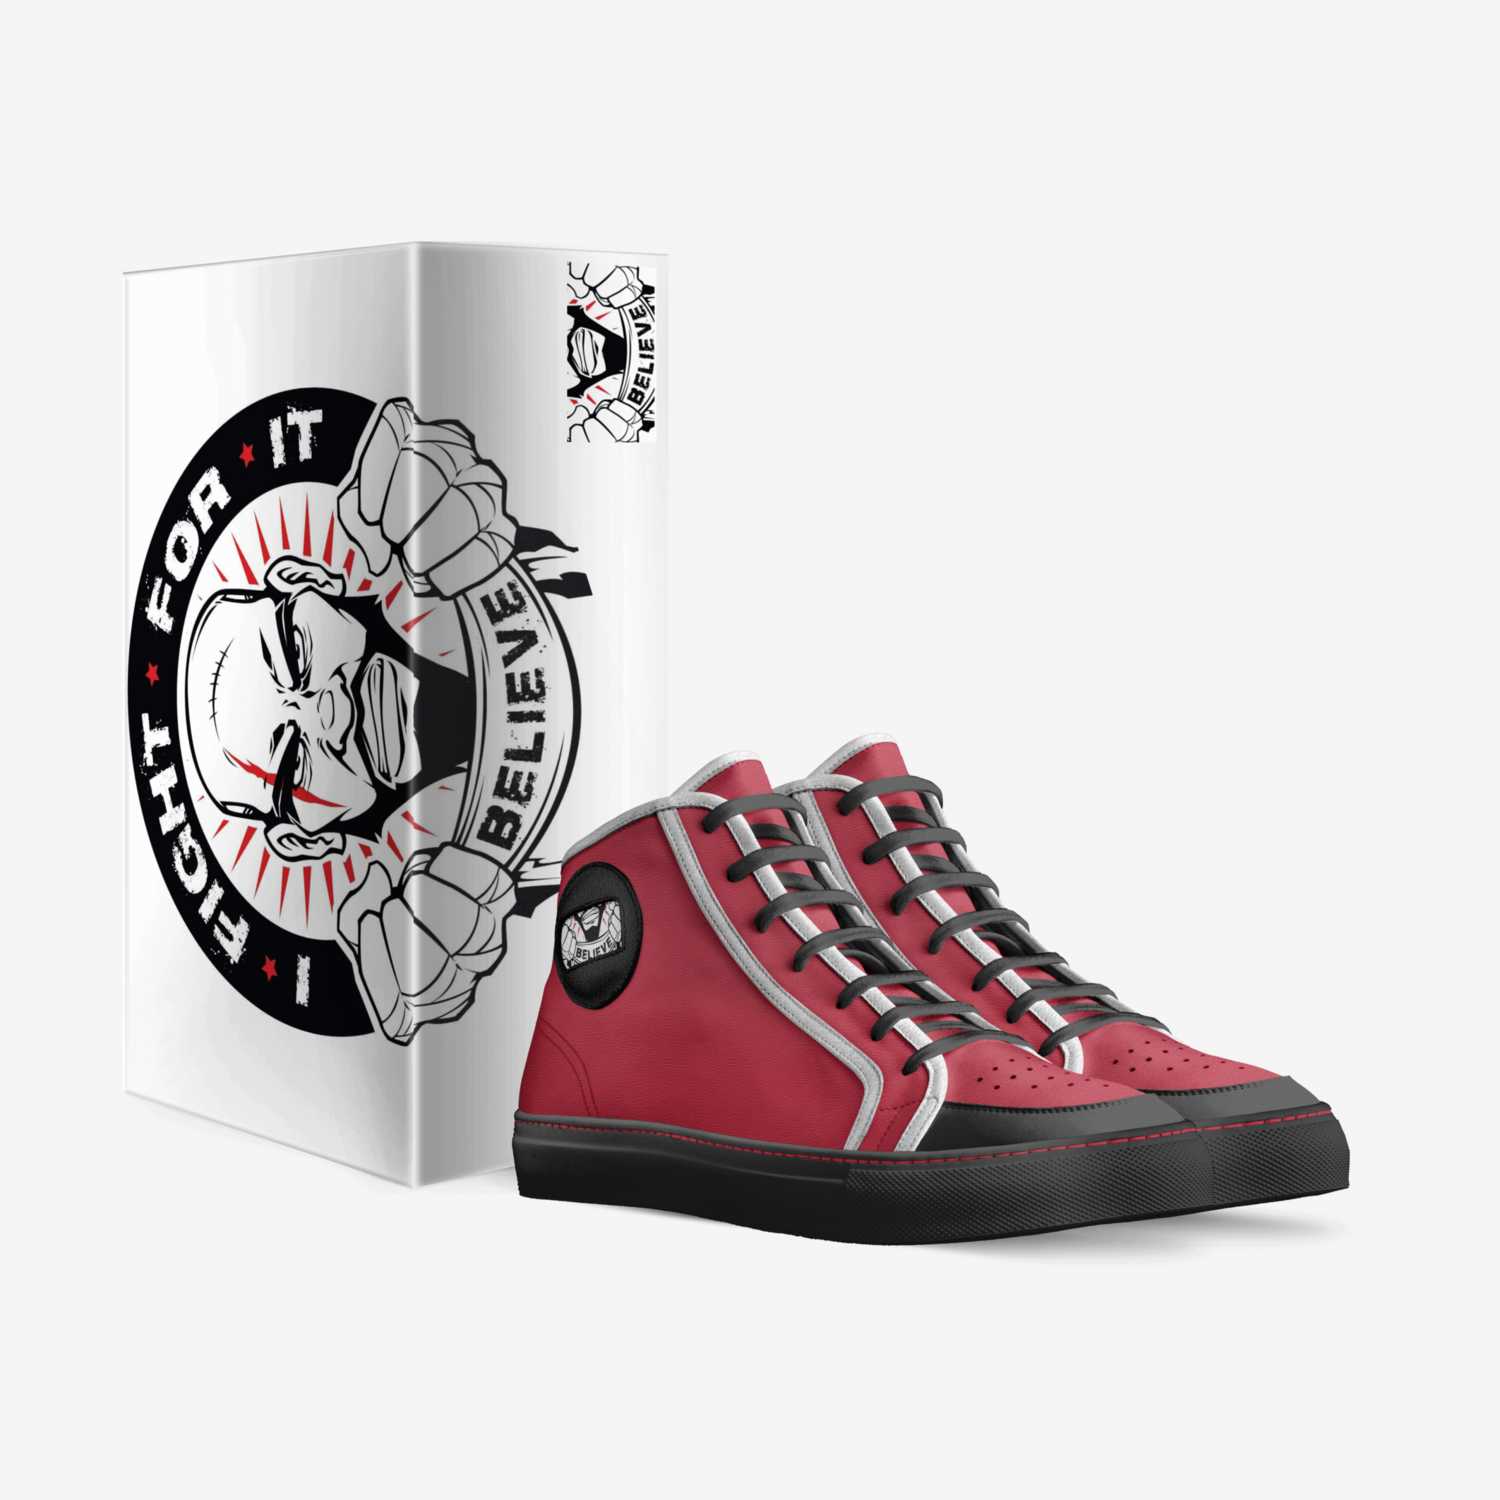 THE FIGHT custom made in Italy shoes by Luther Smith | Box view